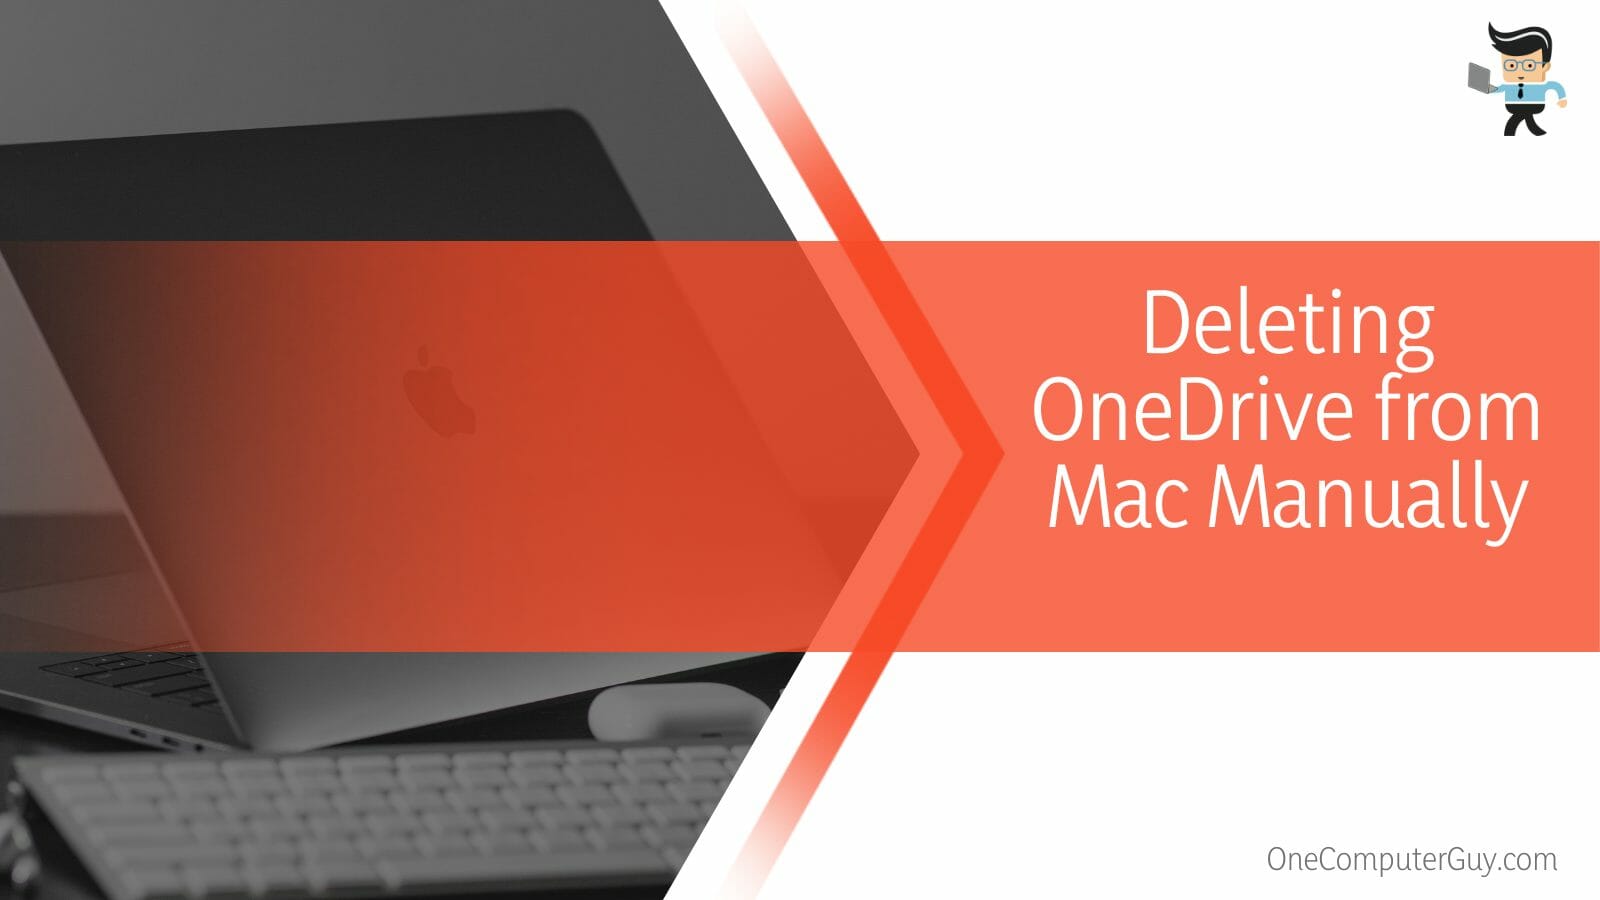 Deleting OneDrive from Mac Manually